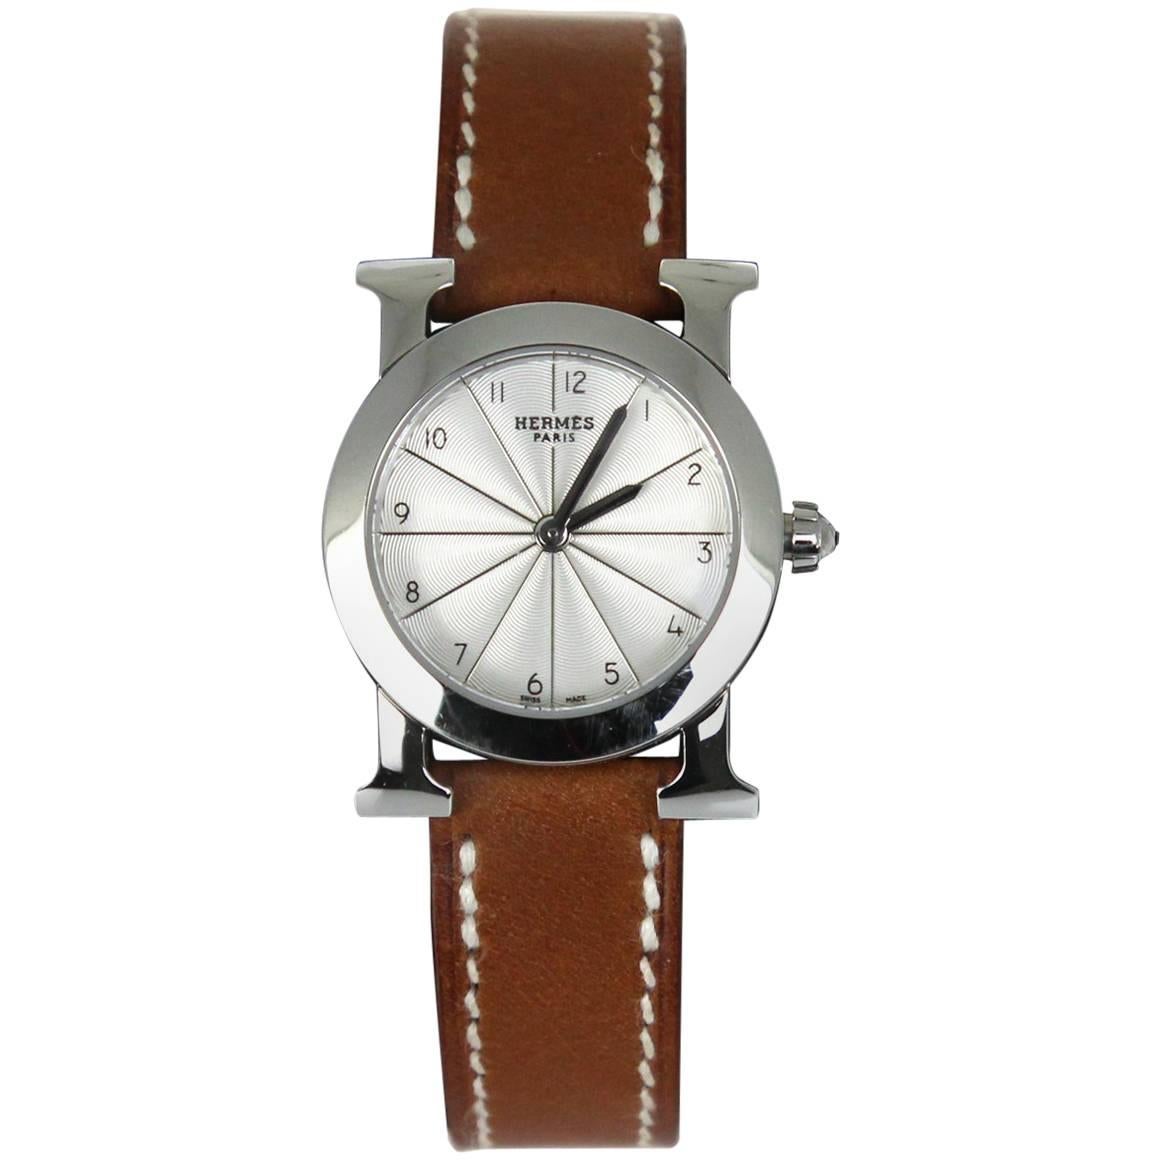 2010s Hermès "Heure H" H Ronde PM Leather Watch